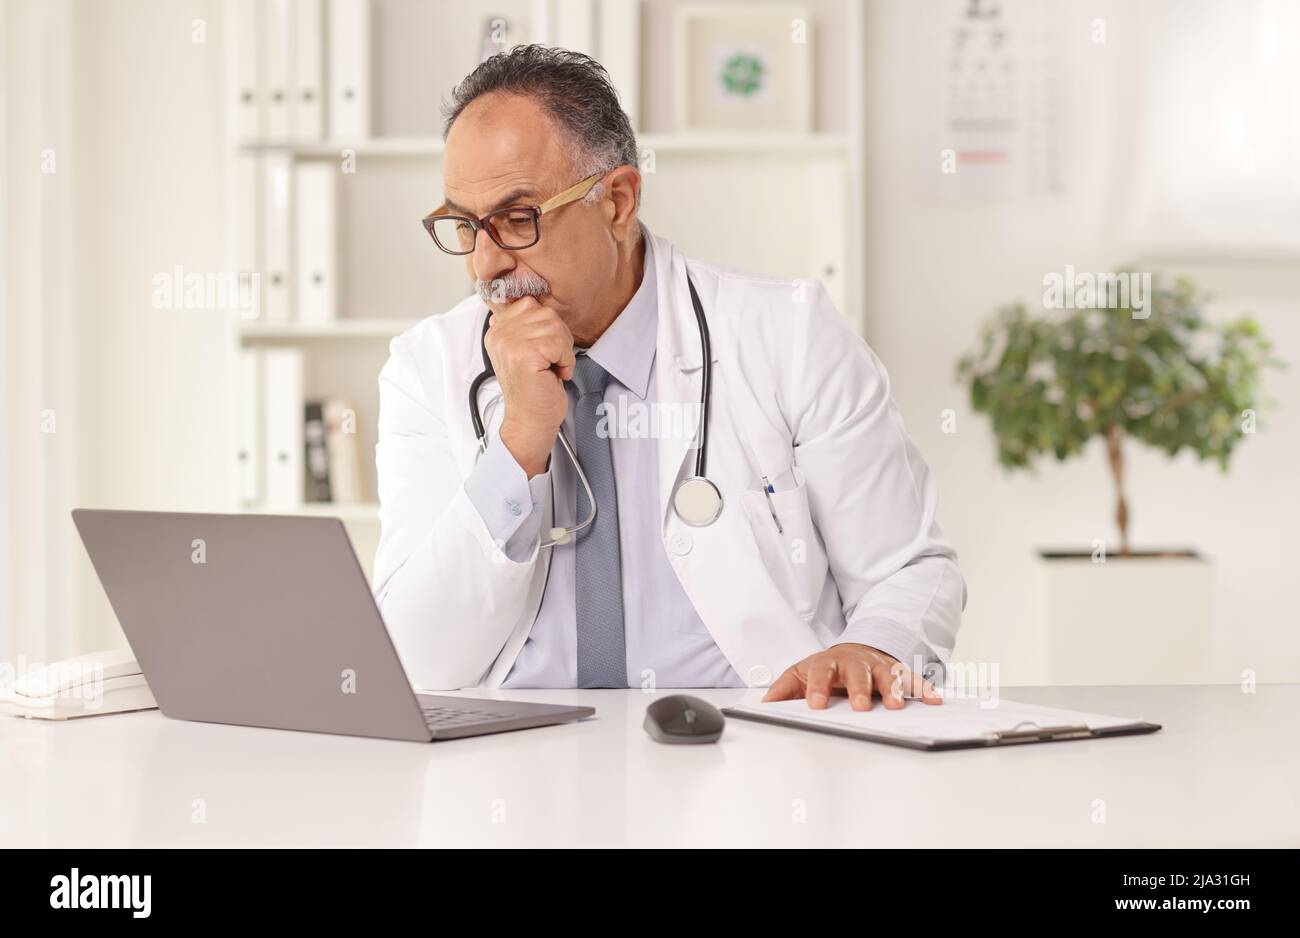 Mature male doctor sitting in an office and looking at a laptop computer Stock Photo